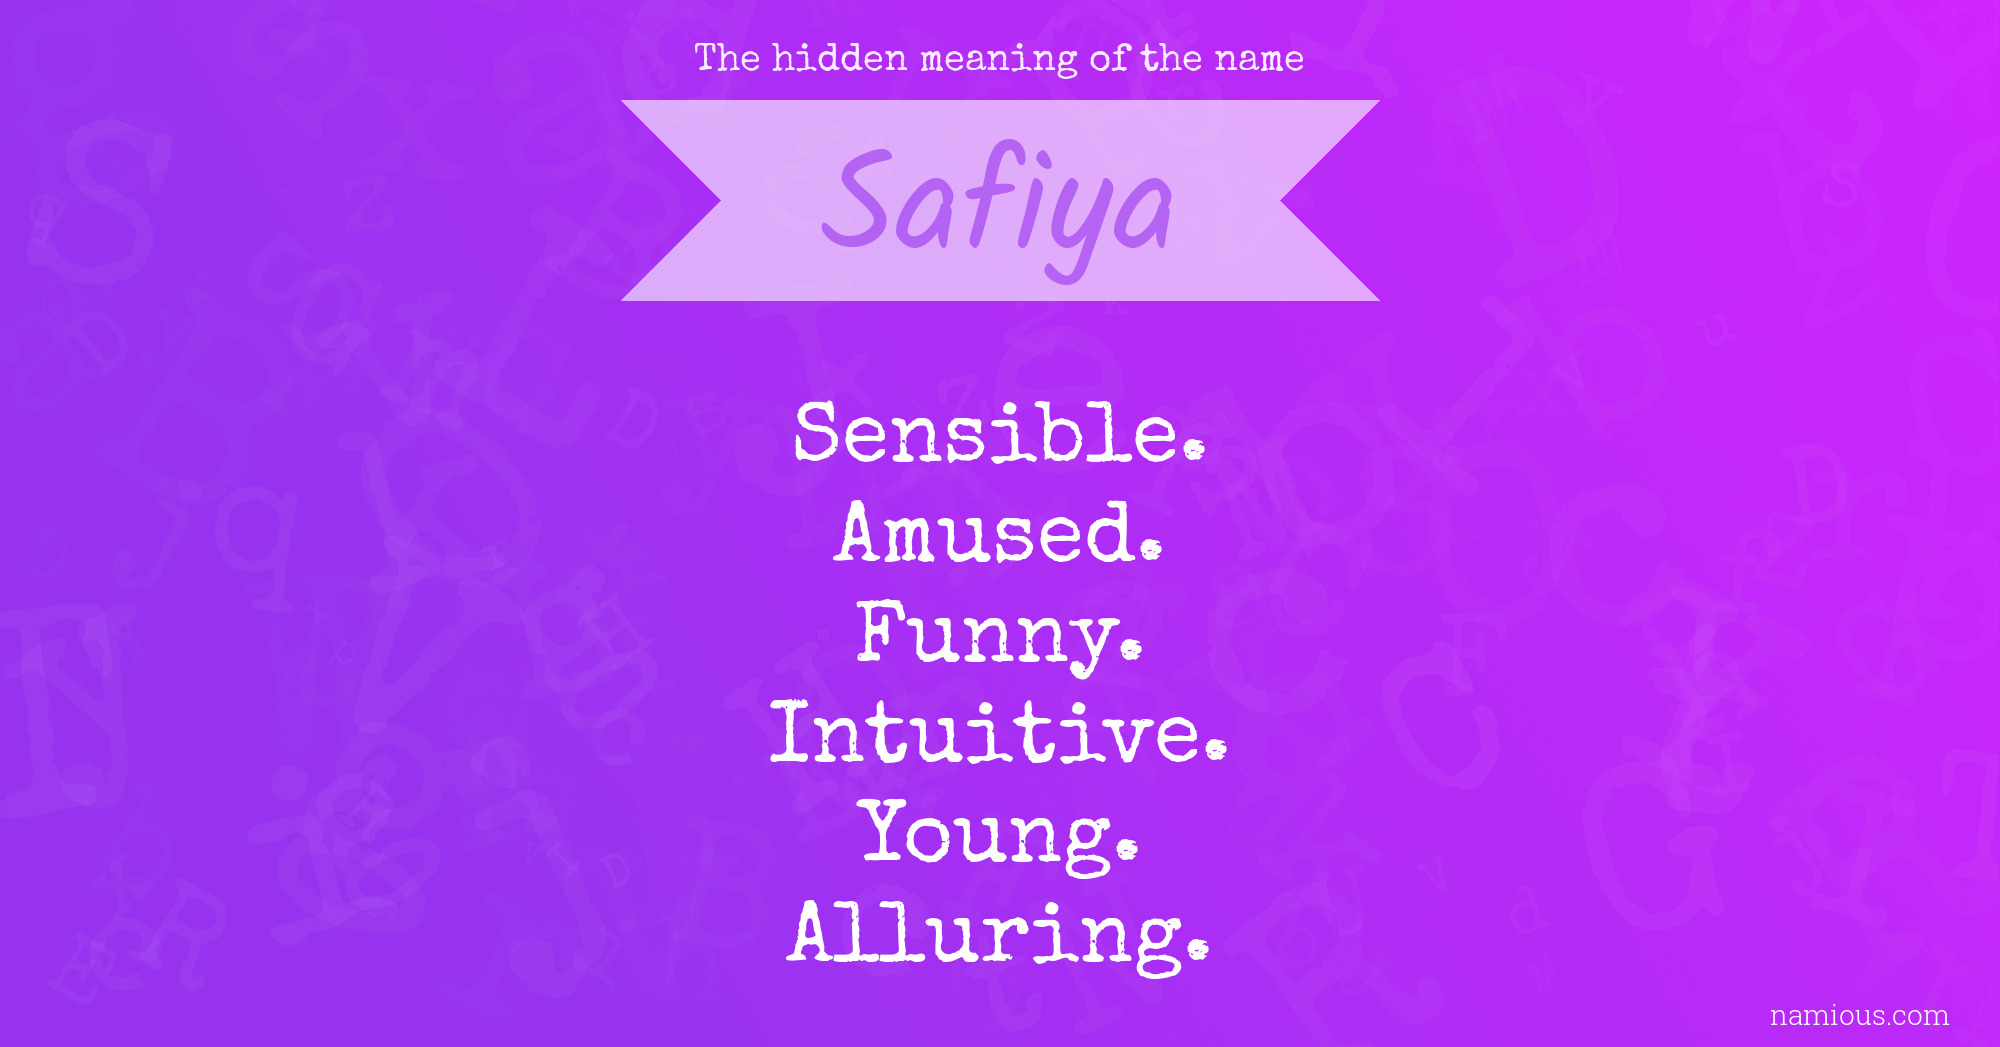 The hidden meaning of the name Safiya